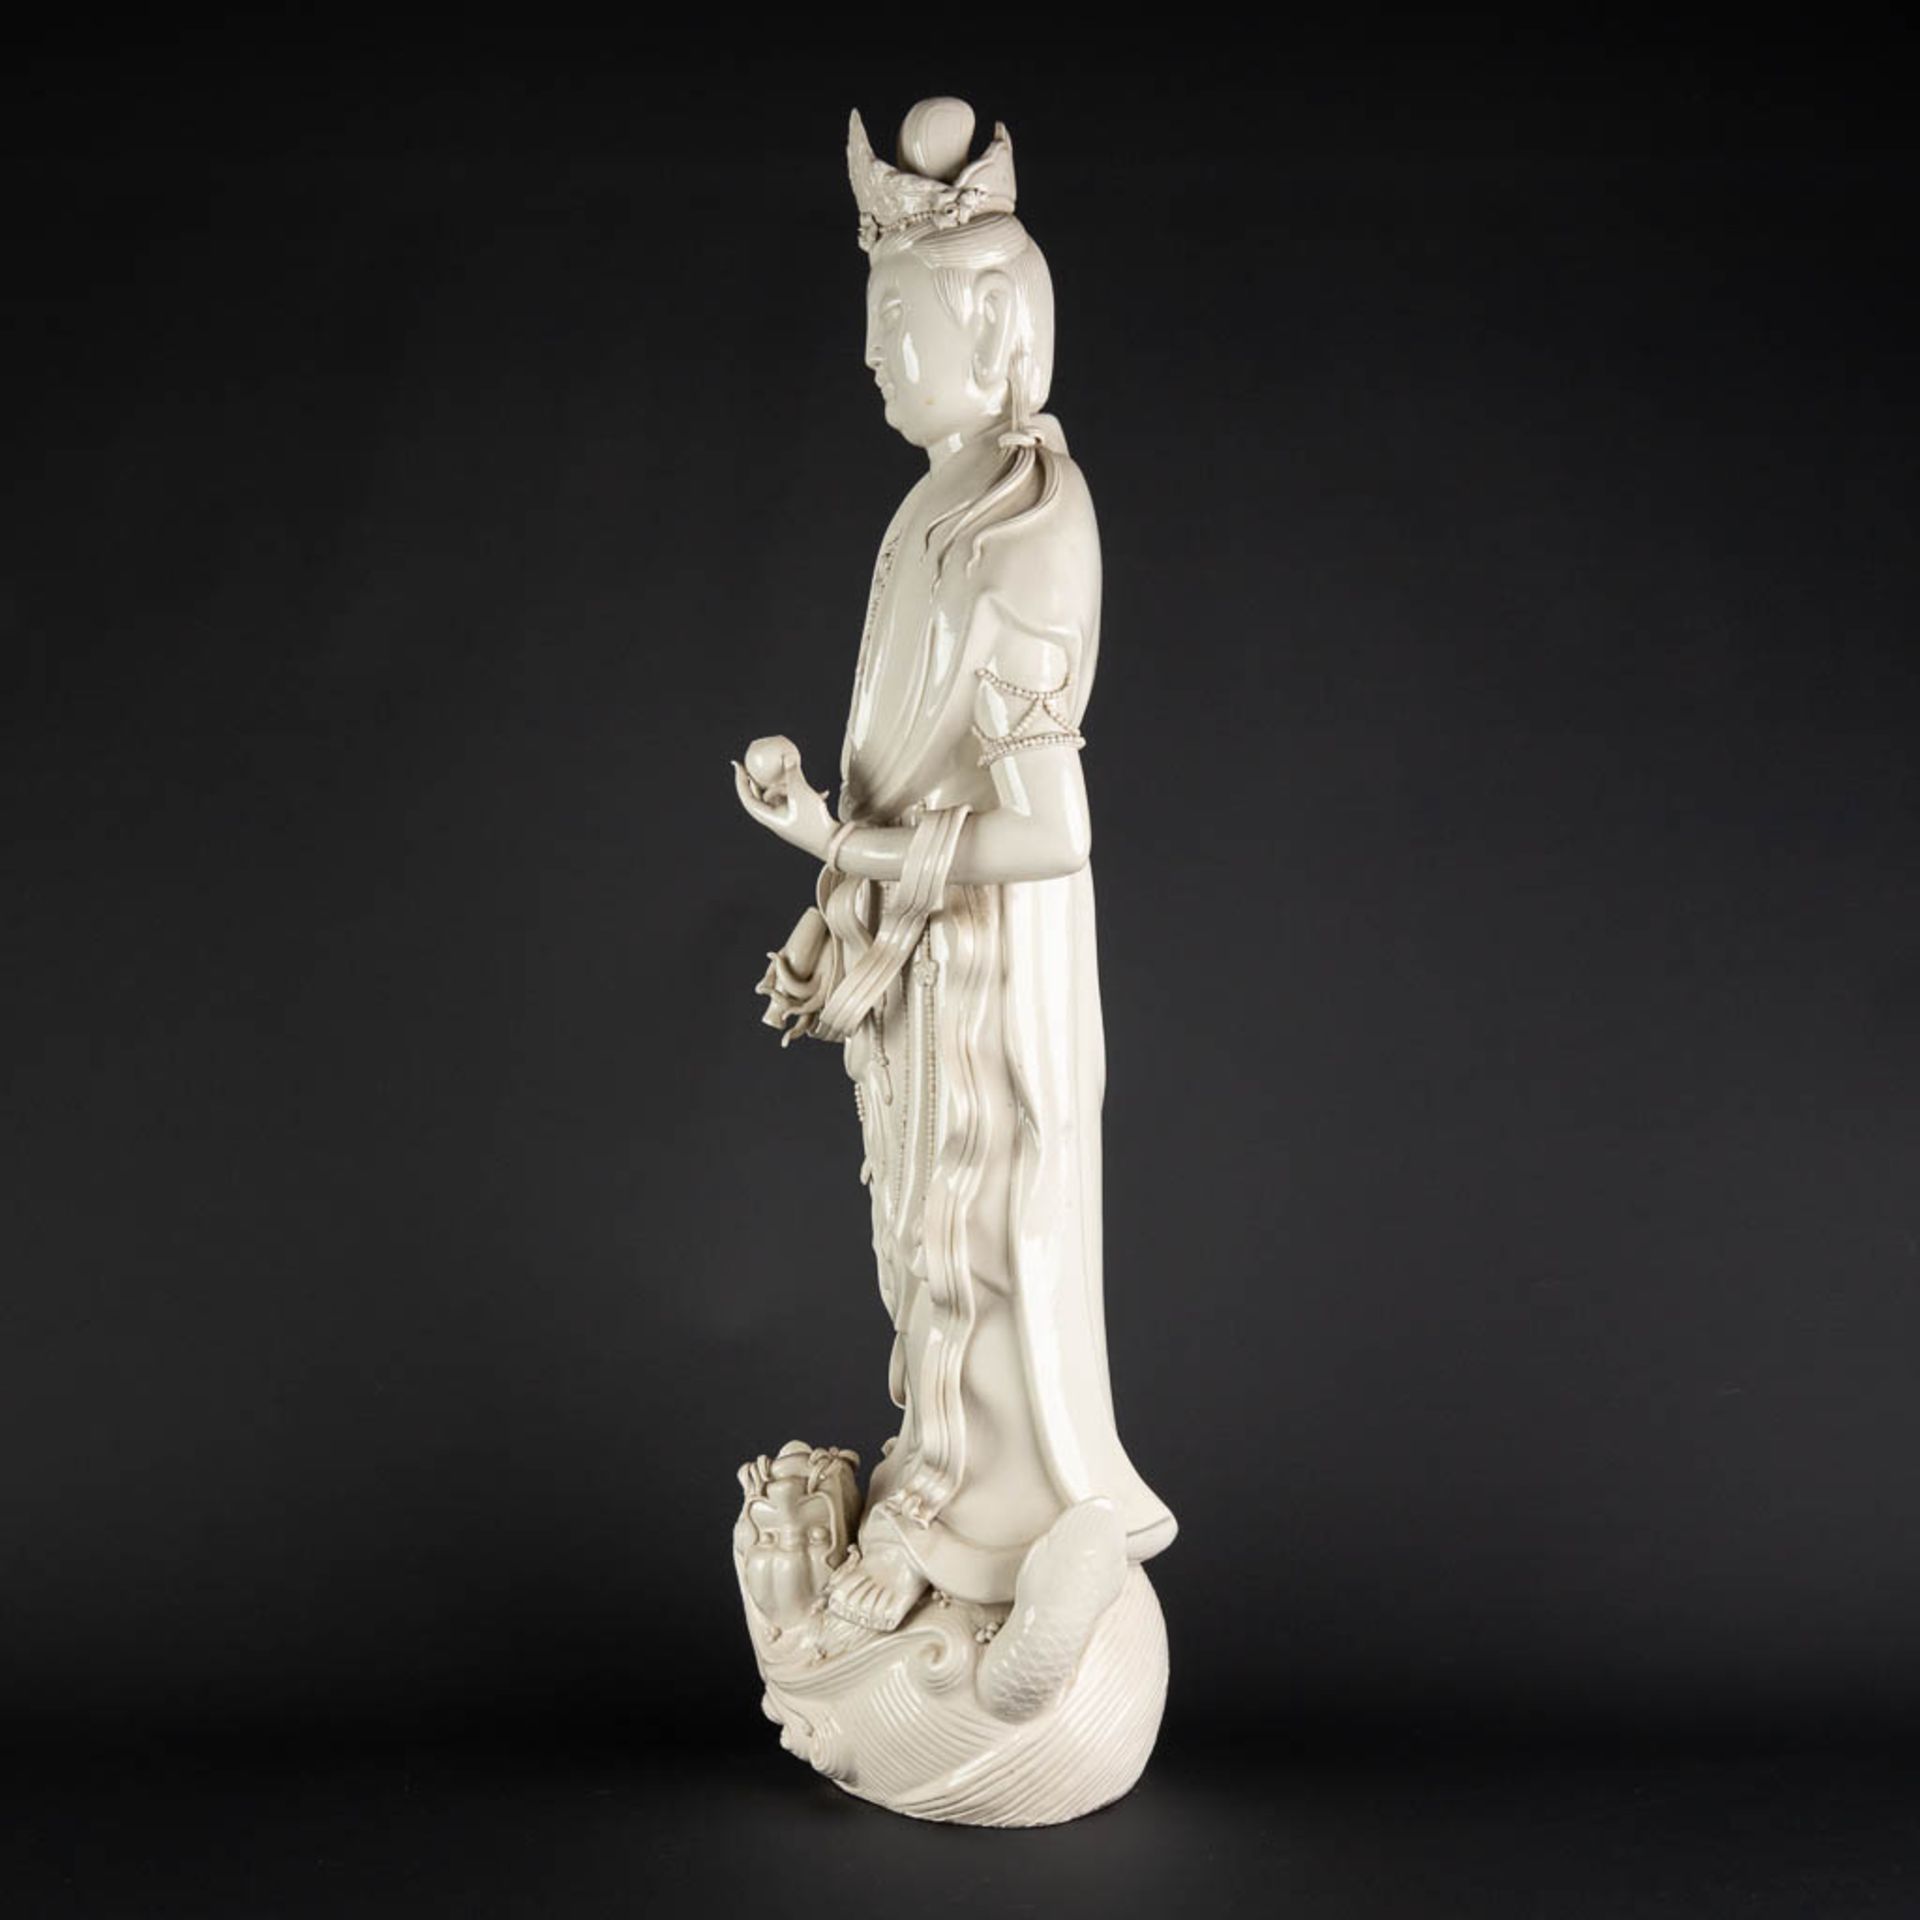 A large Chinese Guanyin figurine, blanc de chine porcelain. 20th C. (D:20 x W:23 x H:80 cm) - Image 4 of 13